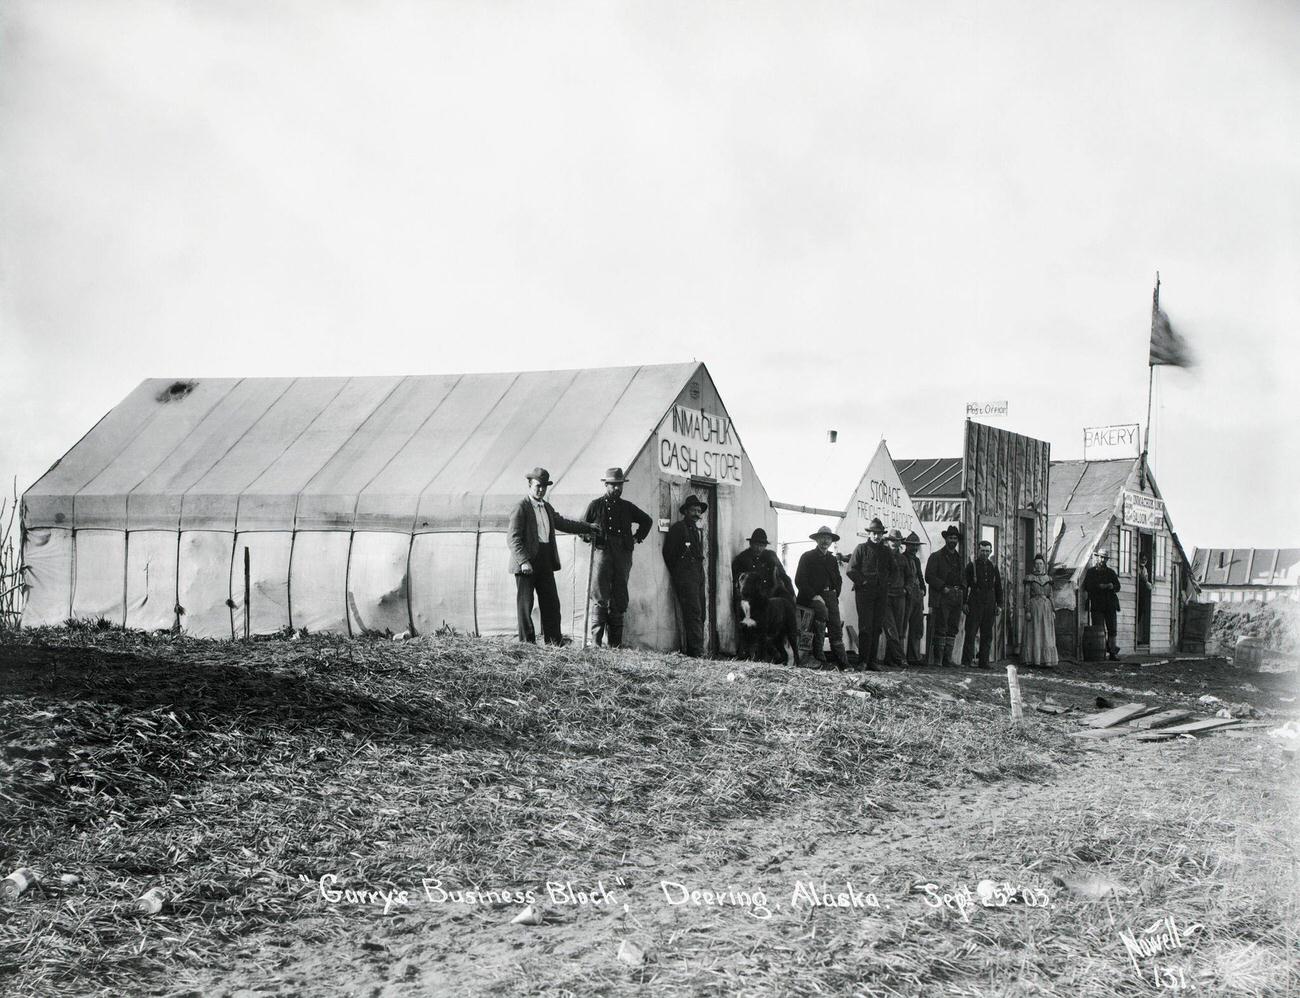 Gurry's Business Block in Deering, Alaska, featuring tent stores and a bakery-saloon, 1903.